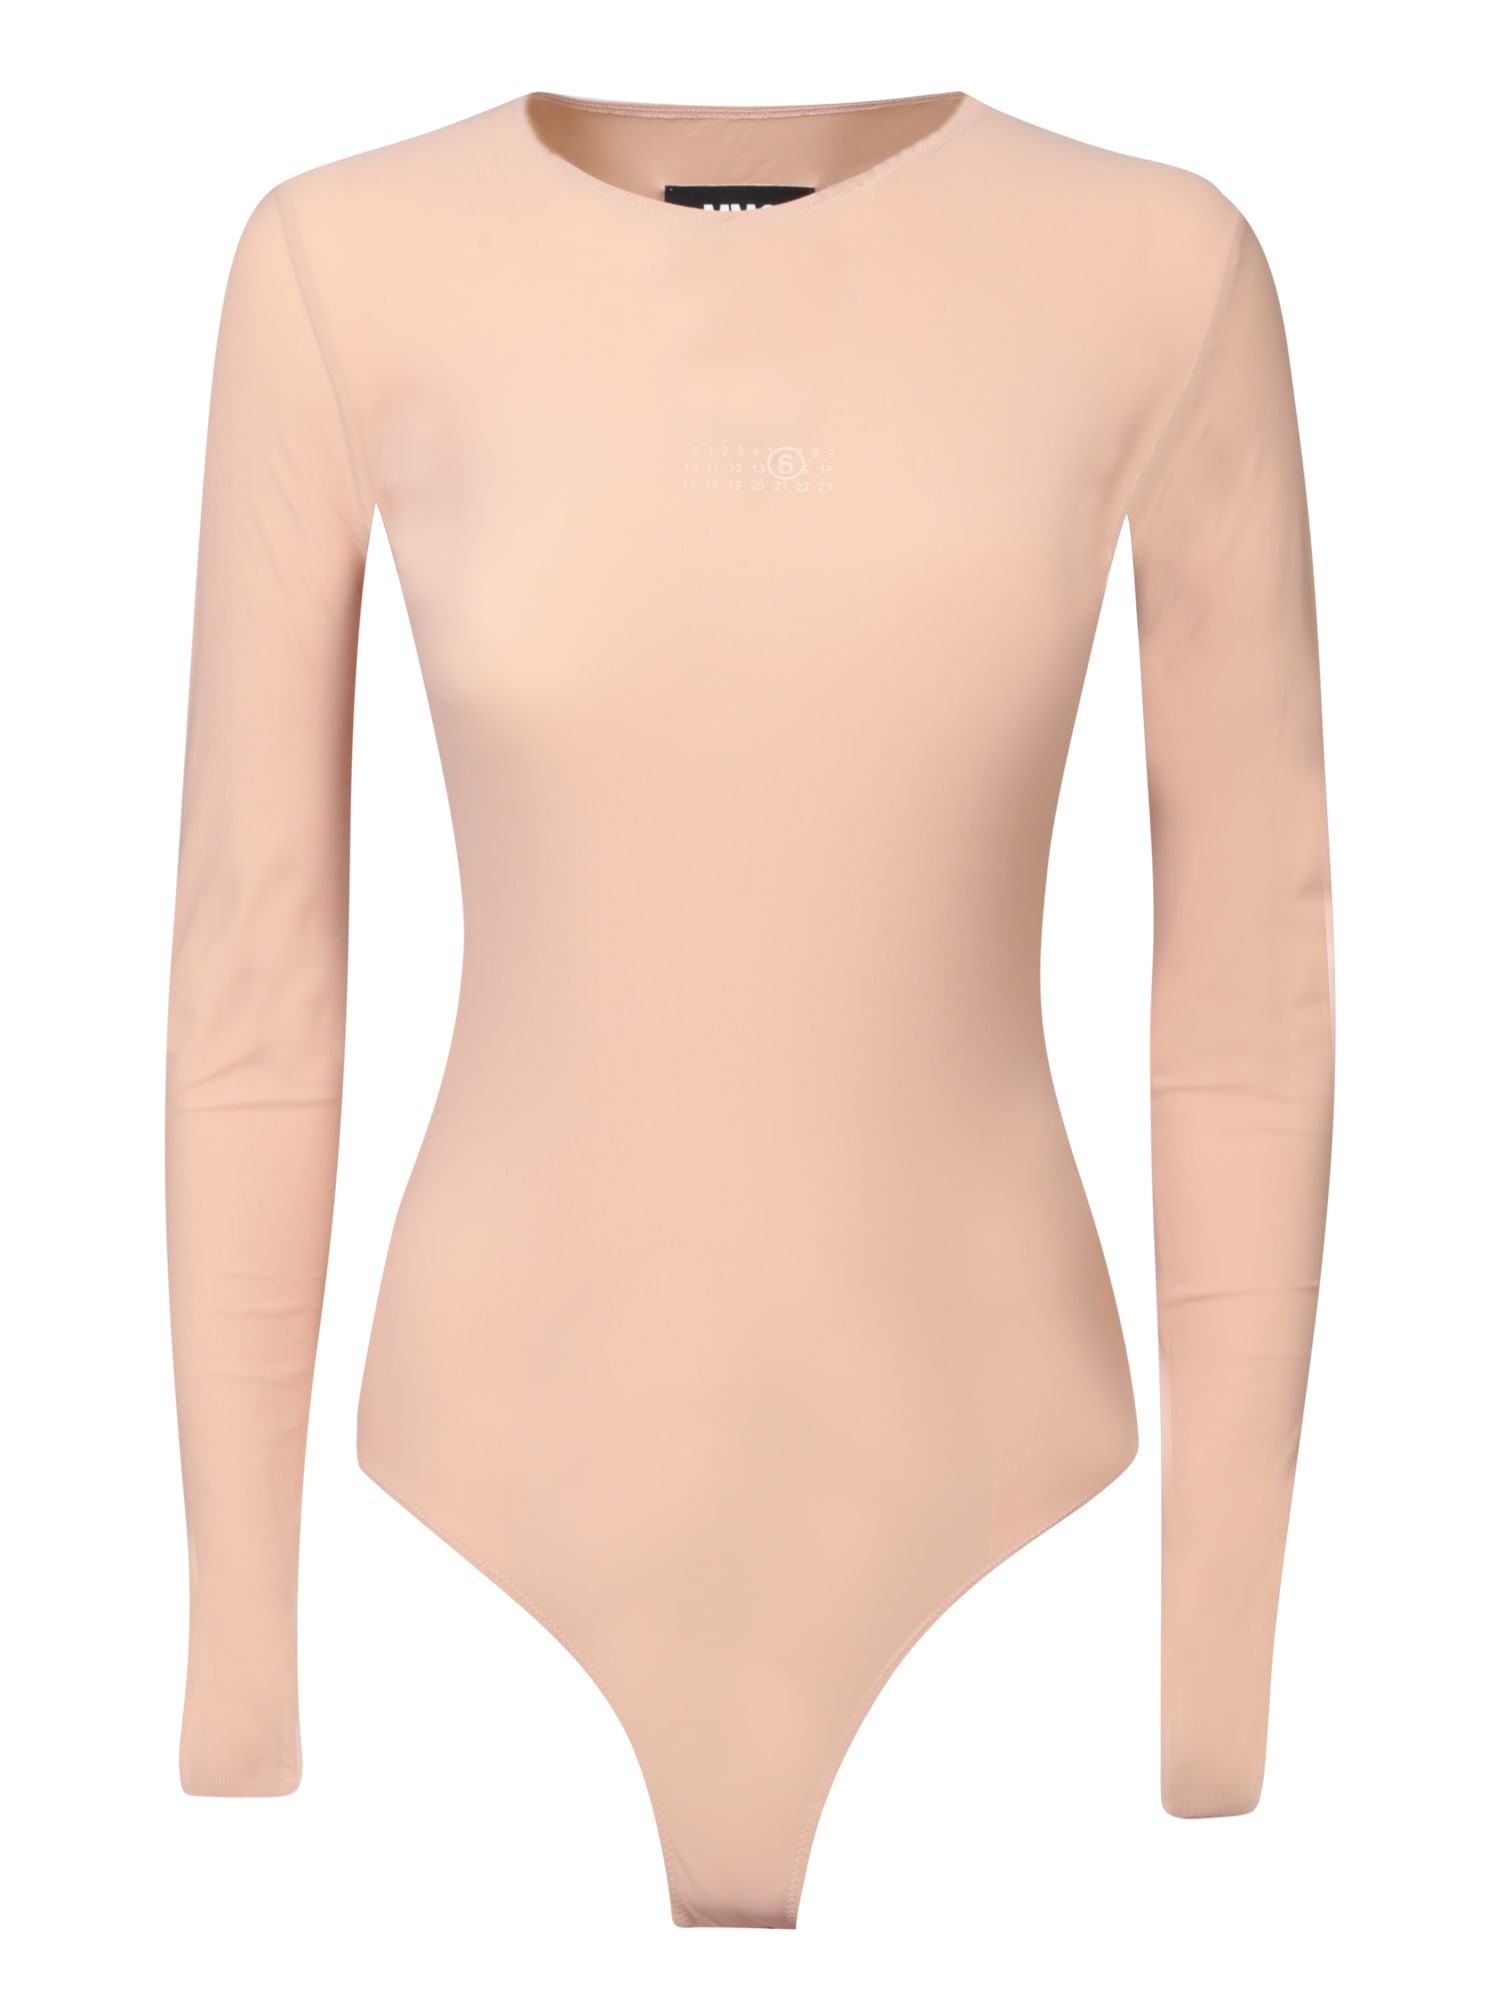 Mm6 Maison Margiela Front Number Graphic Peach Bodysuit In Pink